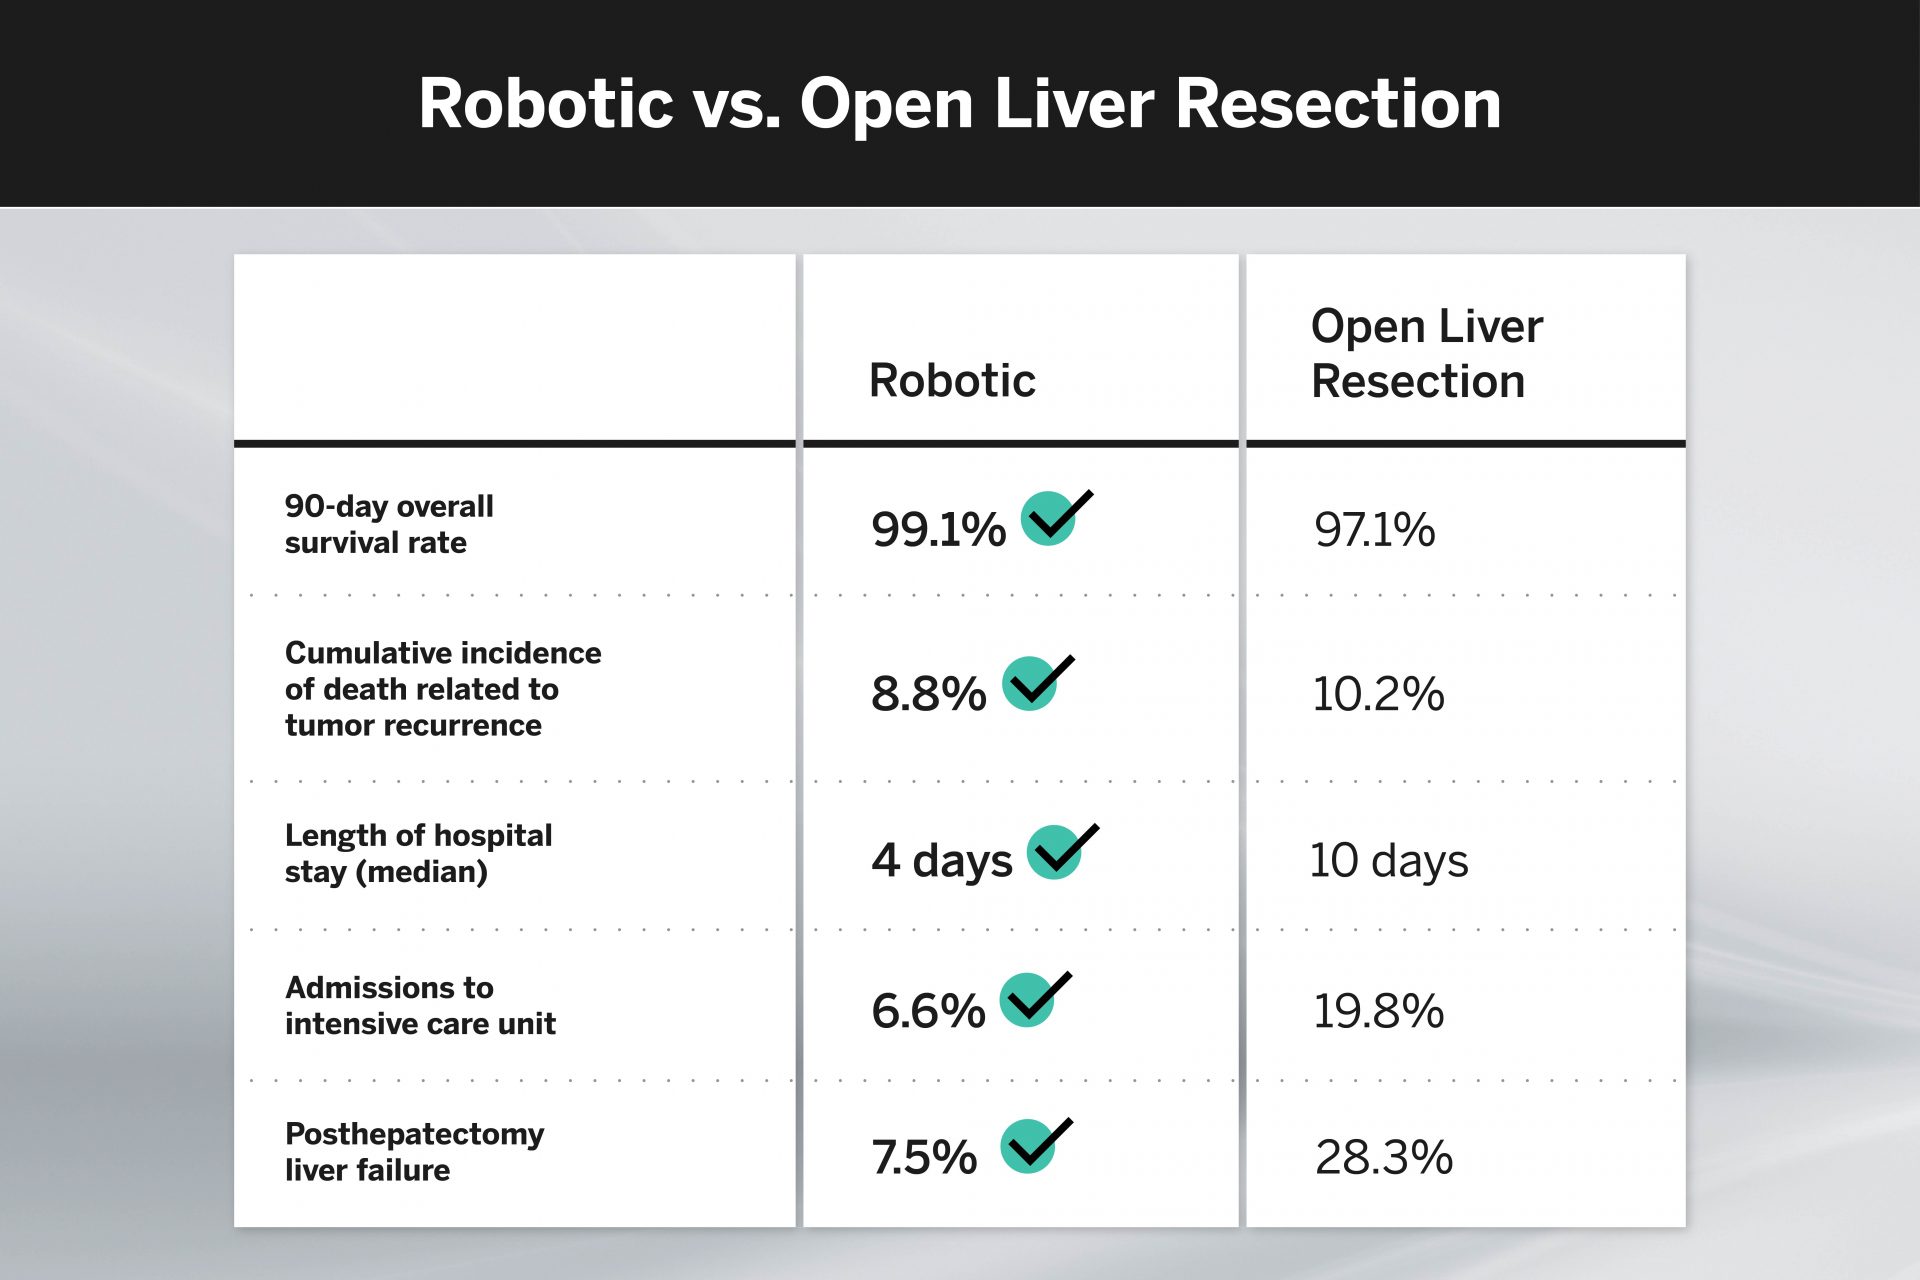 Robotic resection is associated with much shorter hospital LOS, ICU admissions, and rates of severe complications compared to open approach.